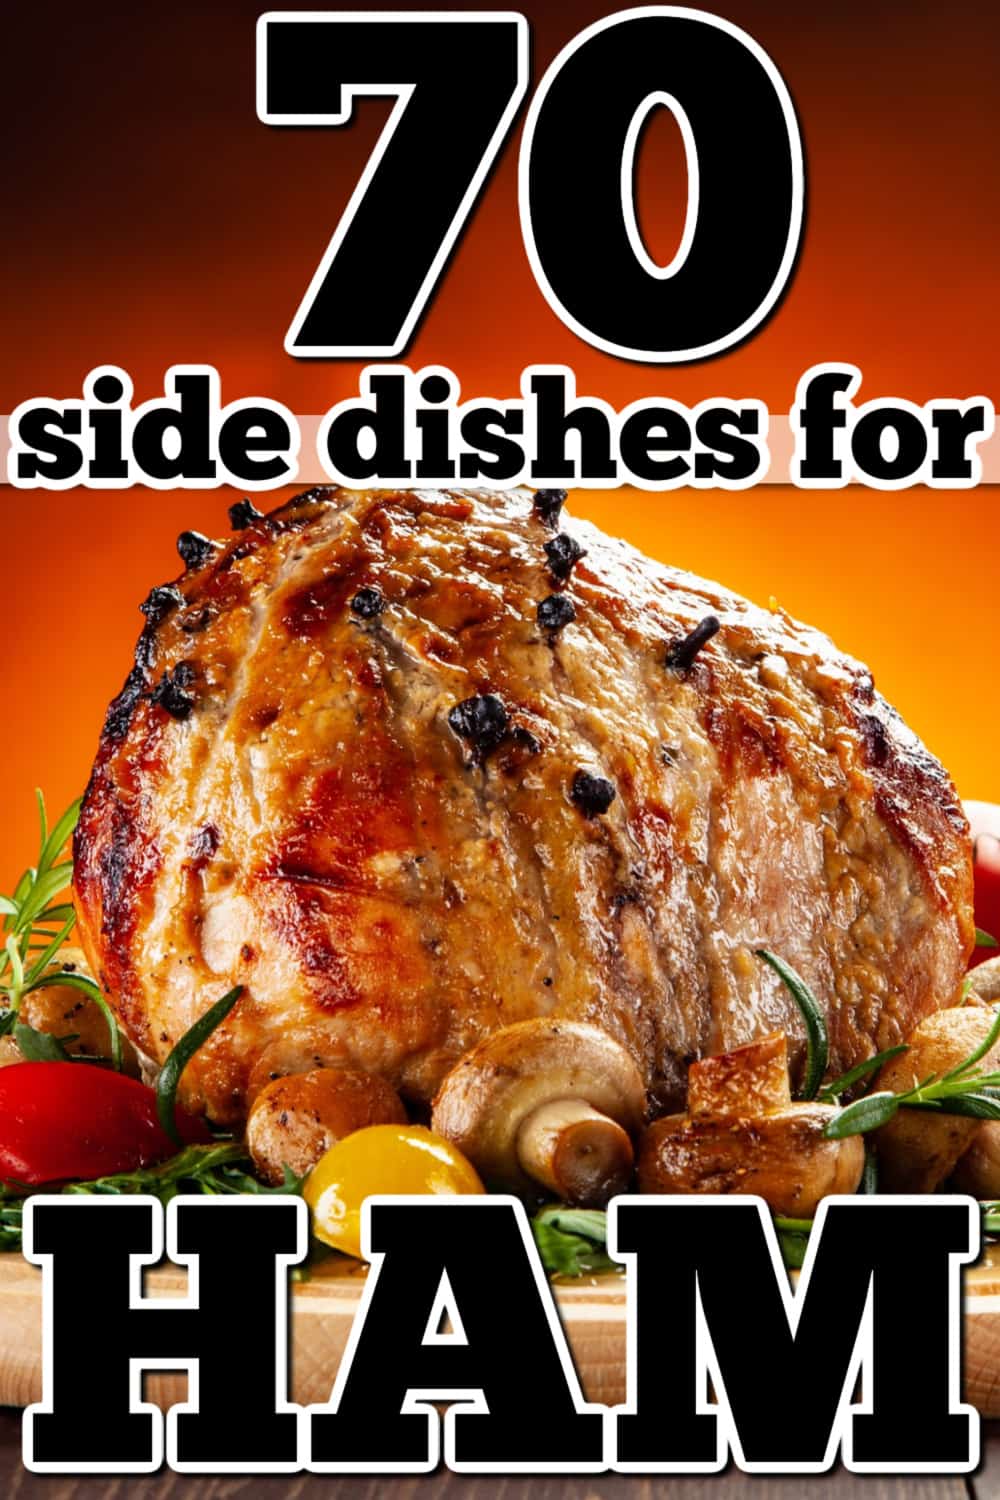 70 side dishes for ham.